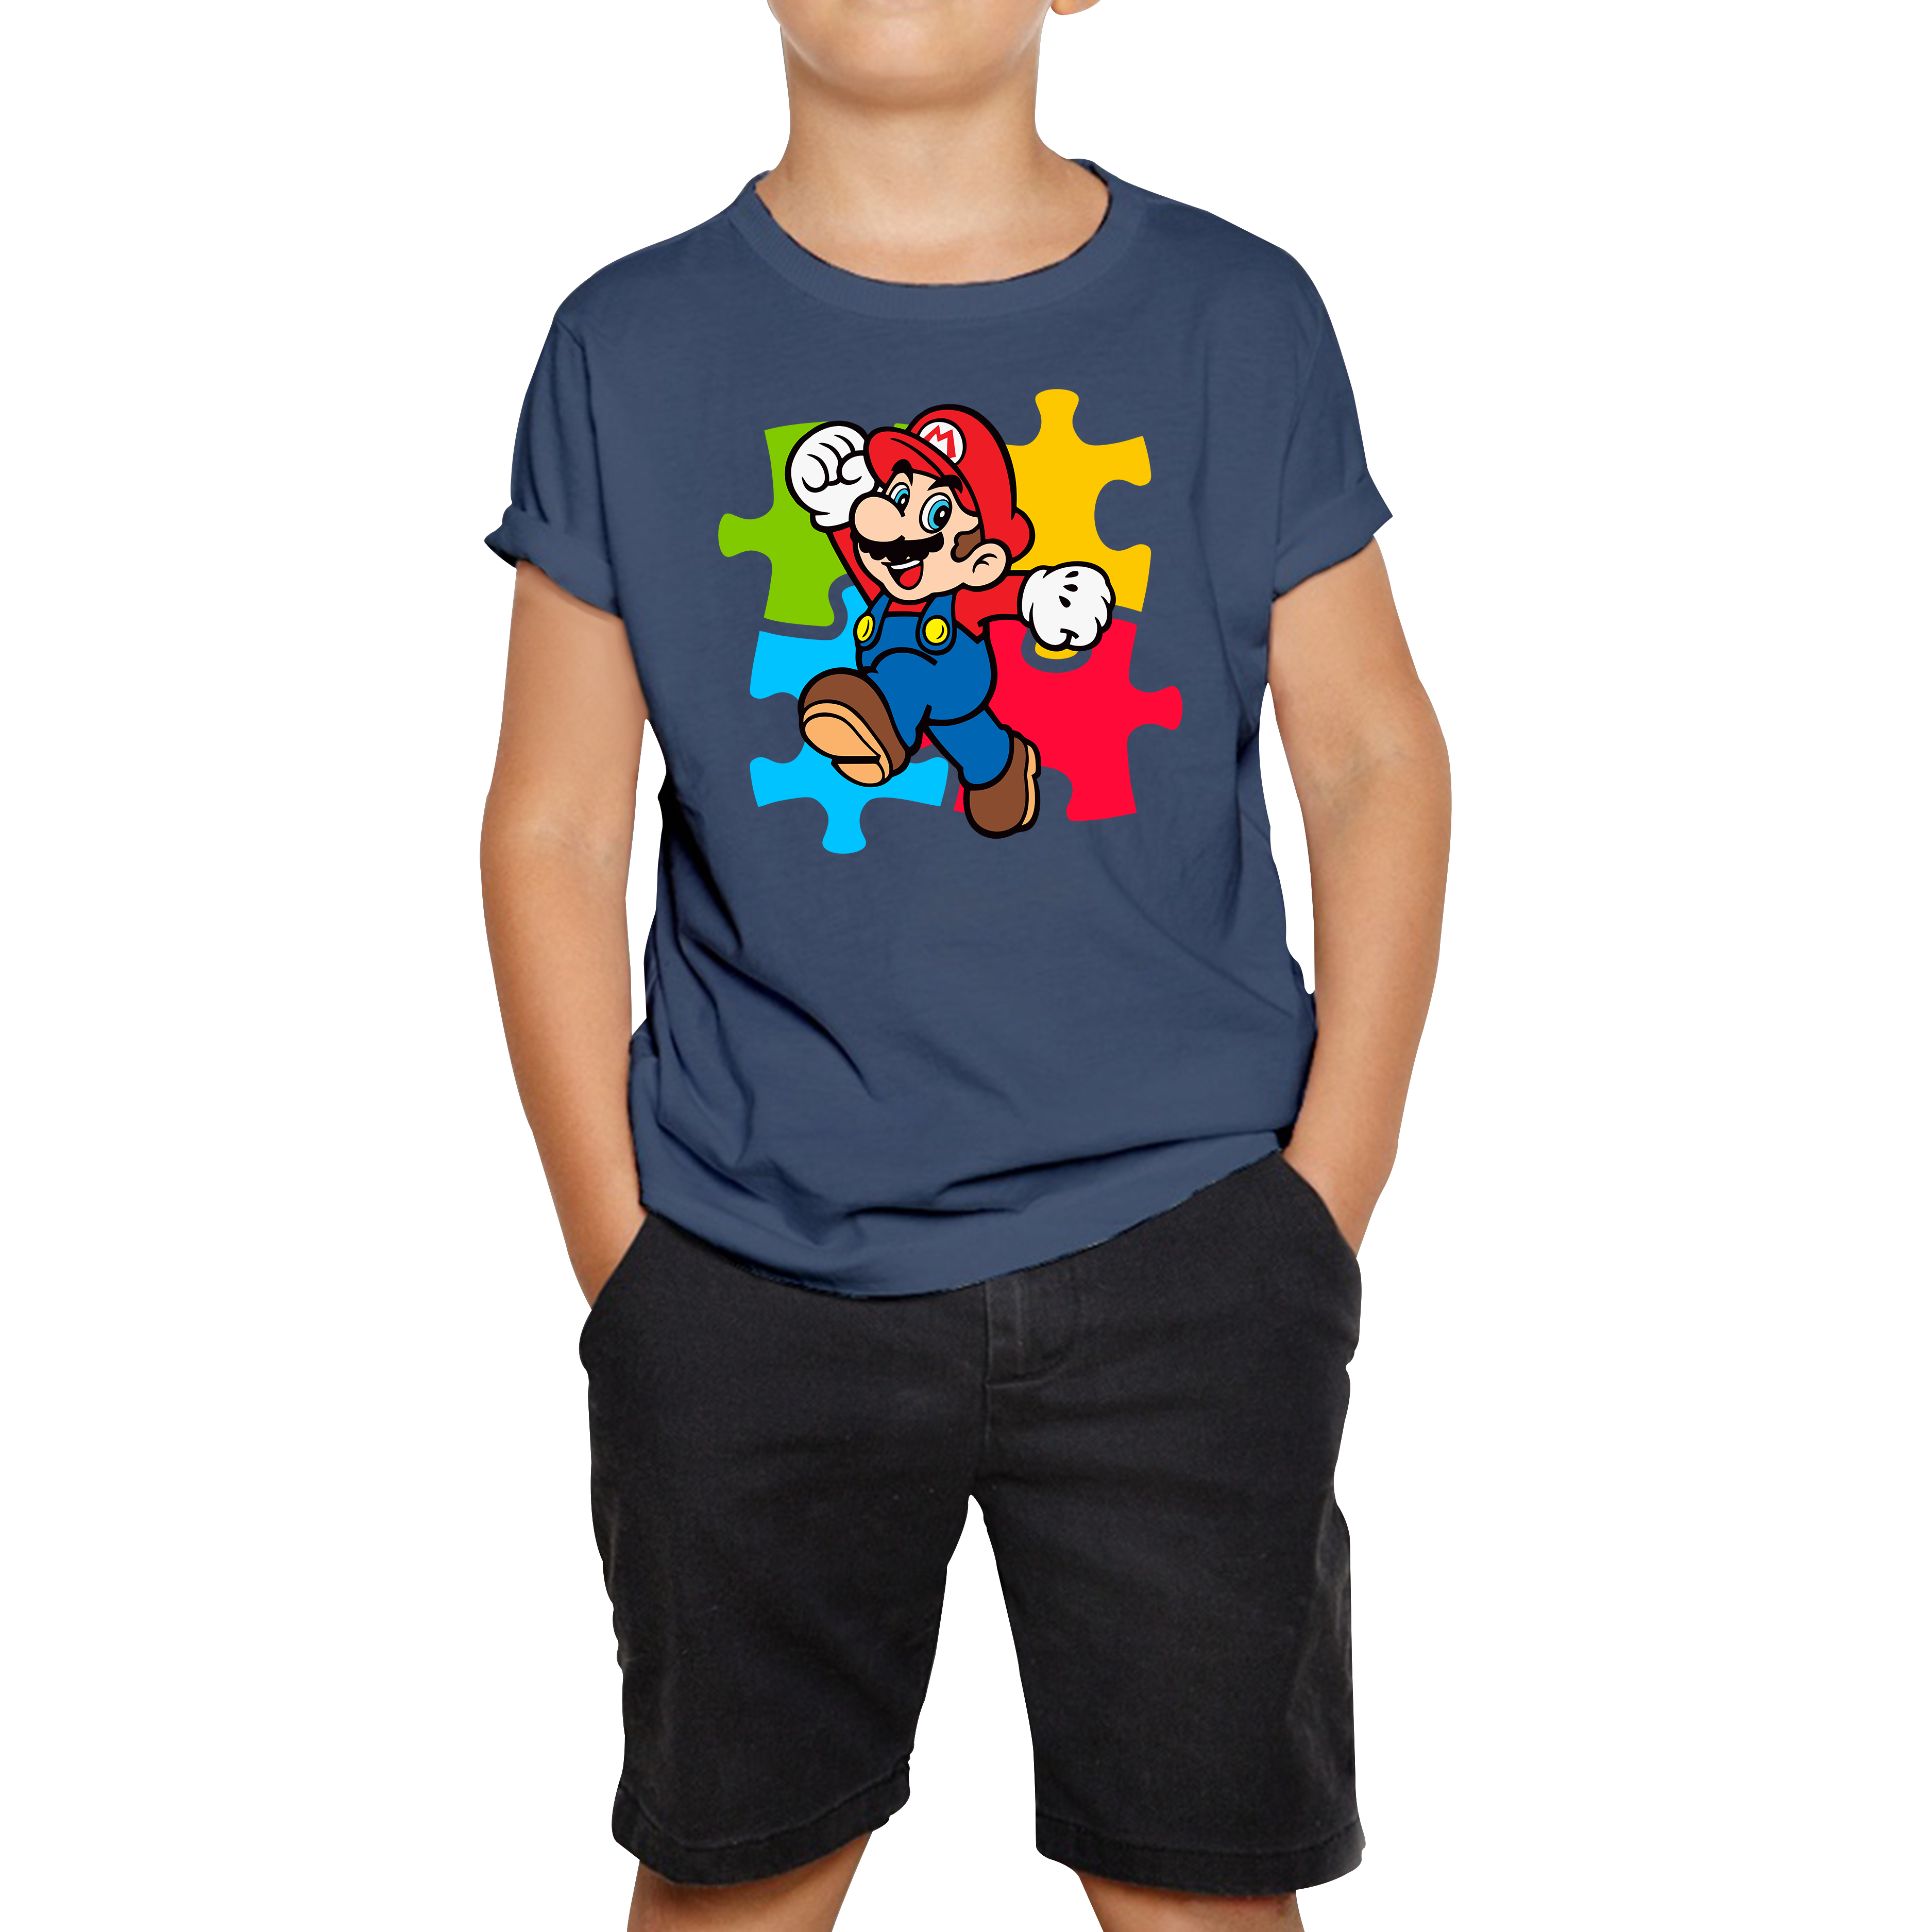 Super Mario T-Shirt Funny Game Lovers Players Video Game Kids Tee